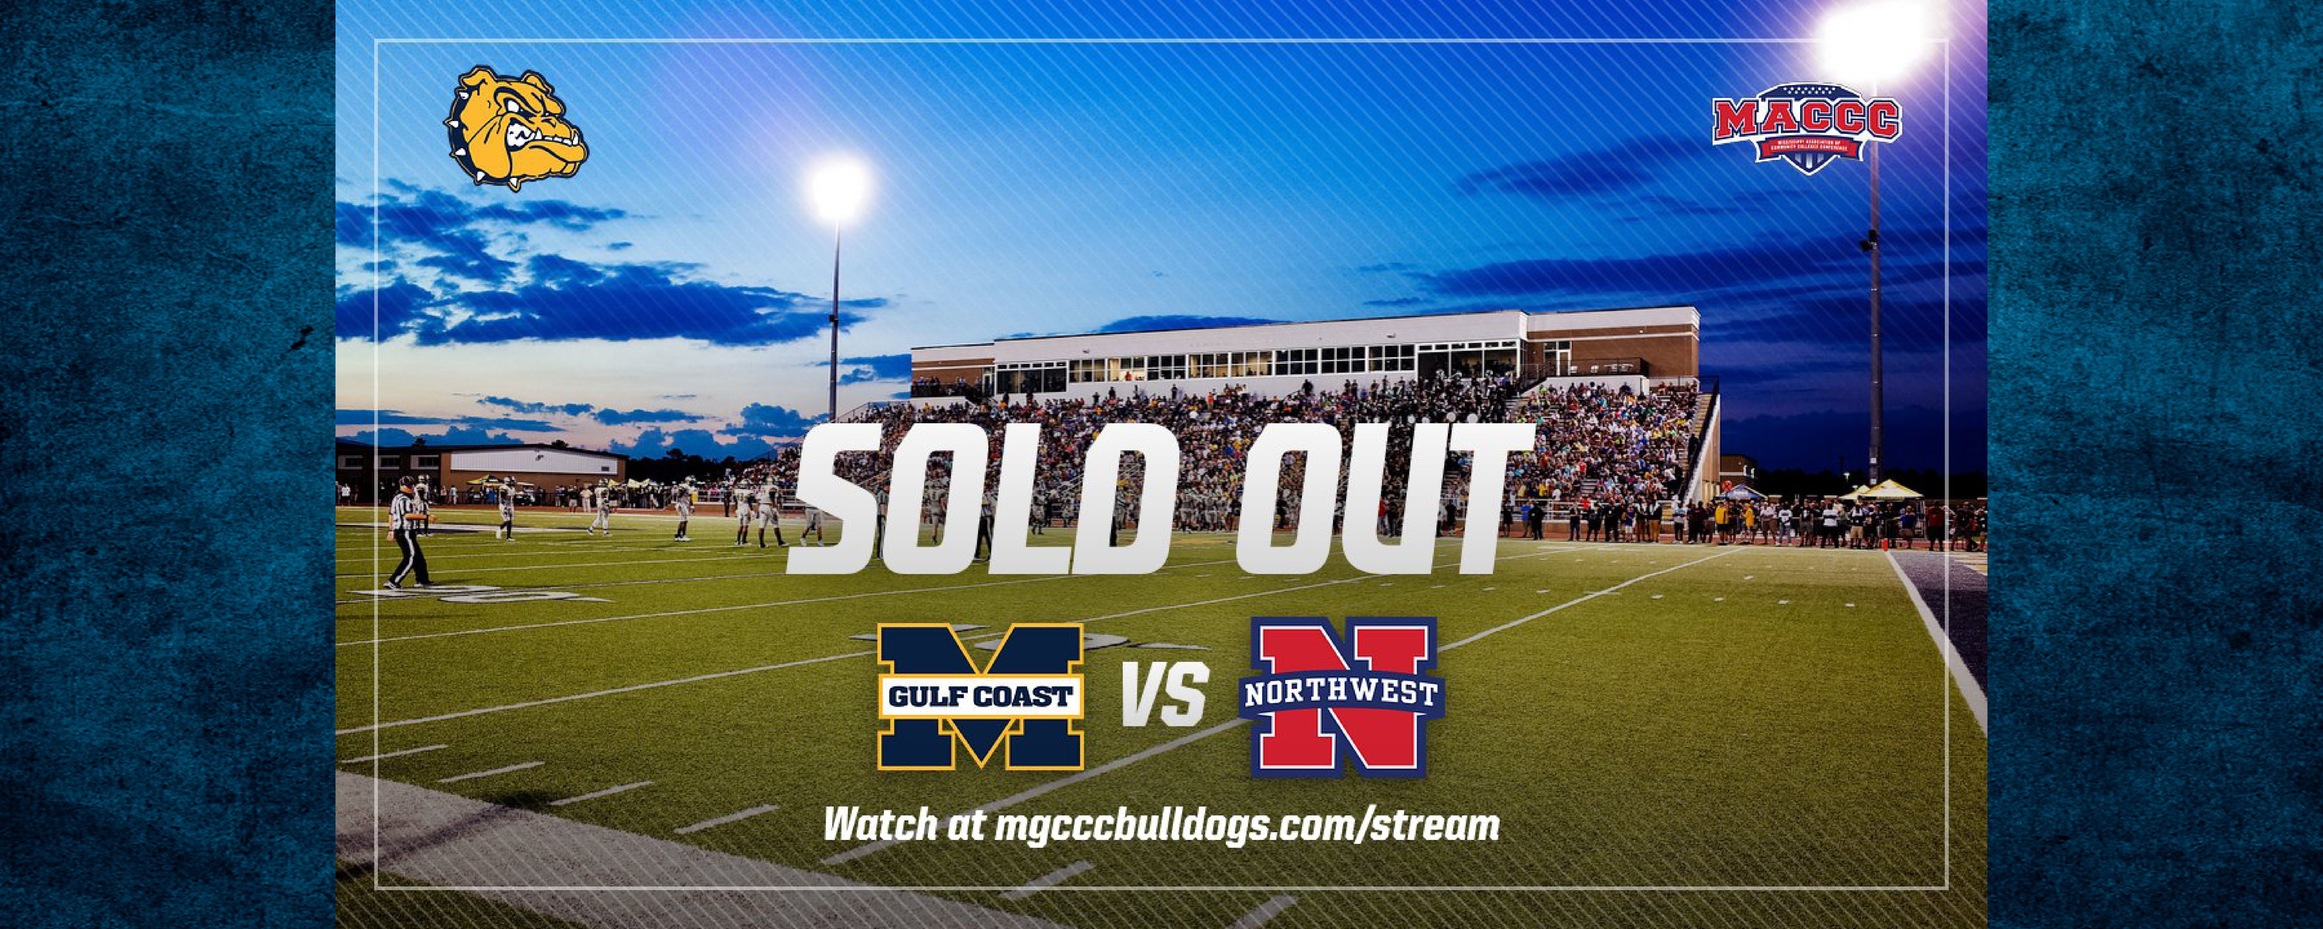 Championship game tickets sold out